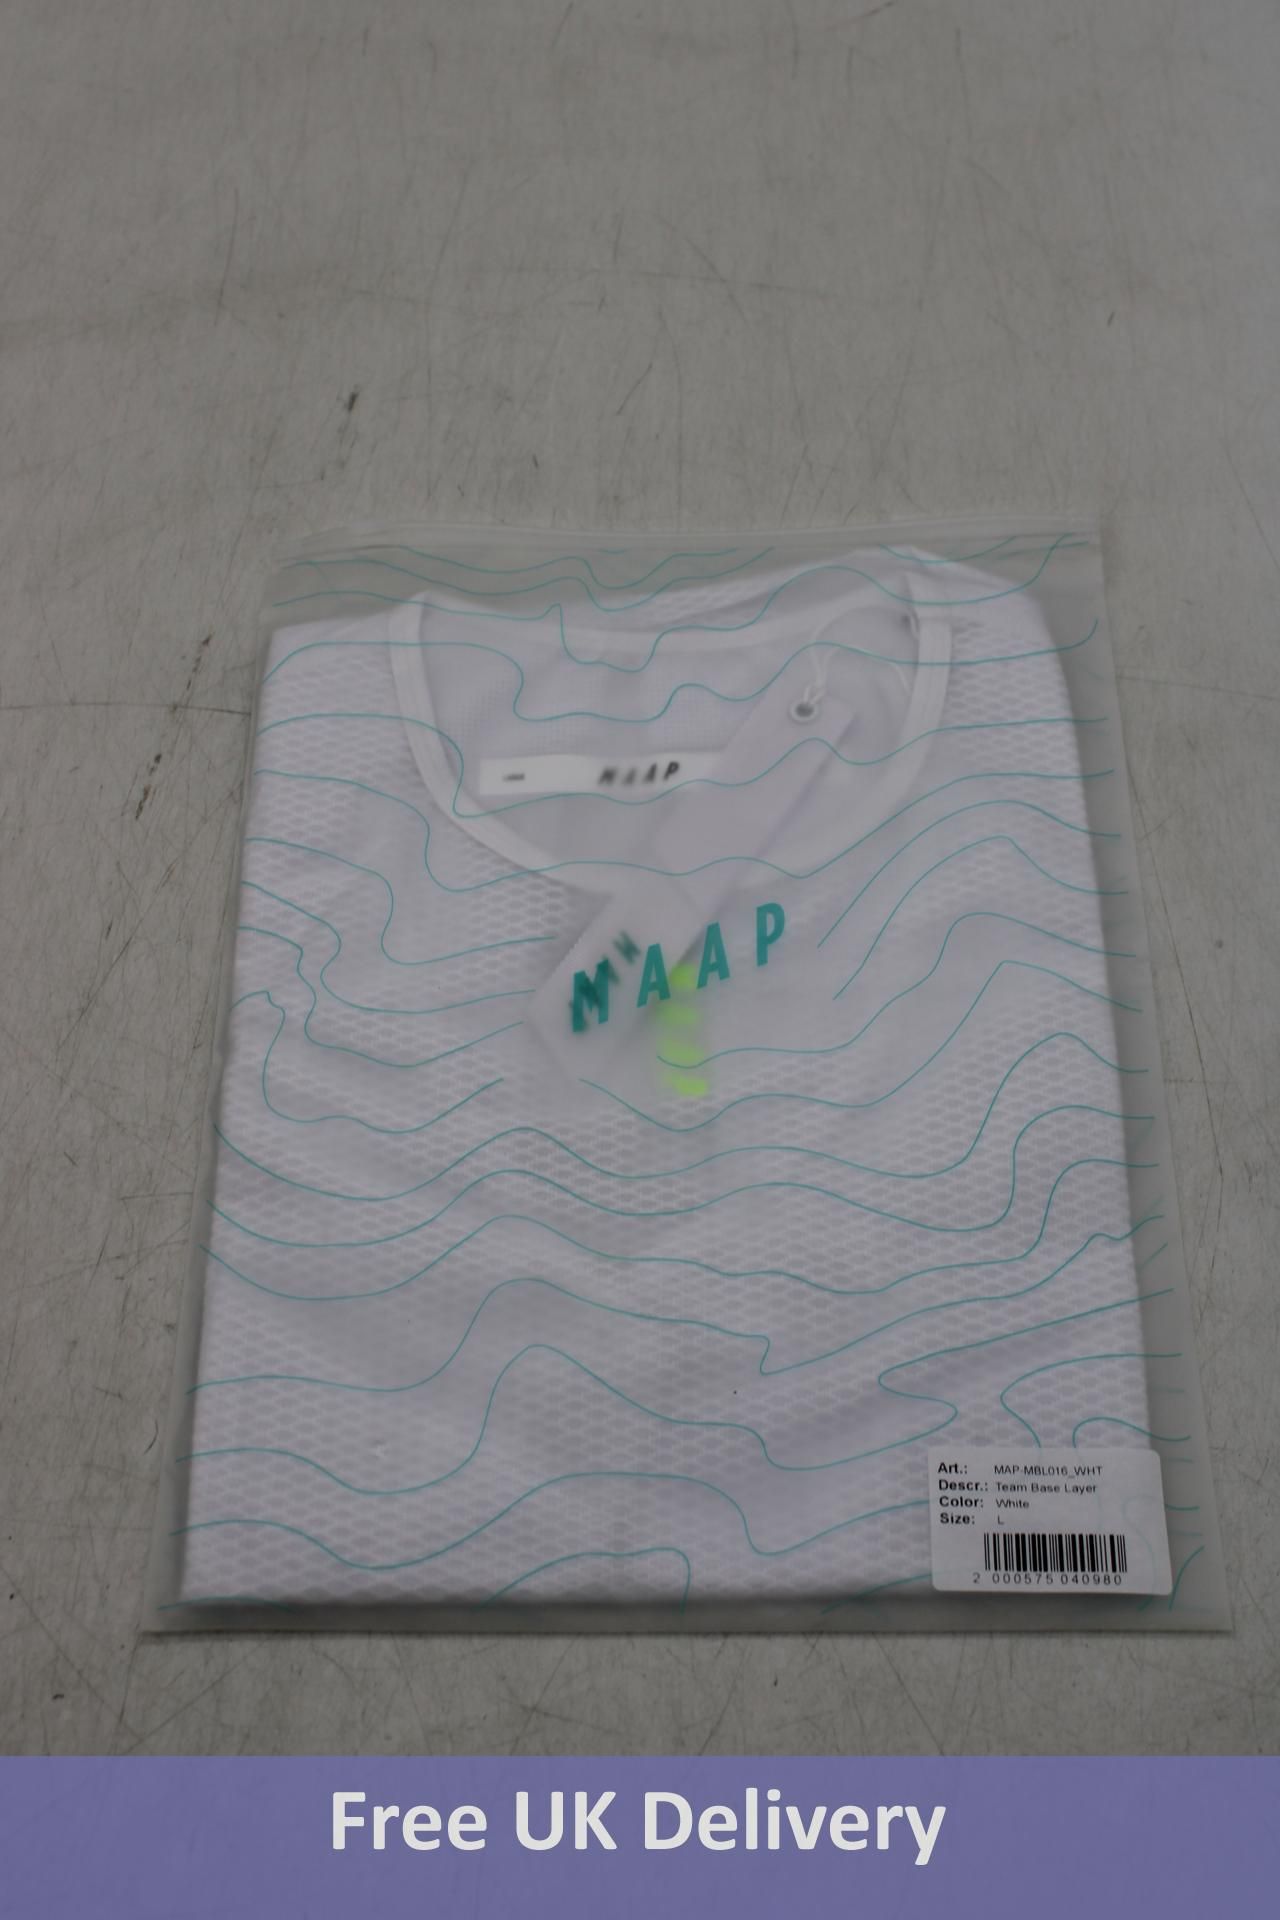 Two Maap Team Base Layer, White, Size S